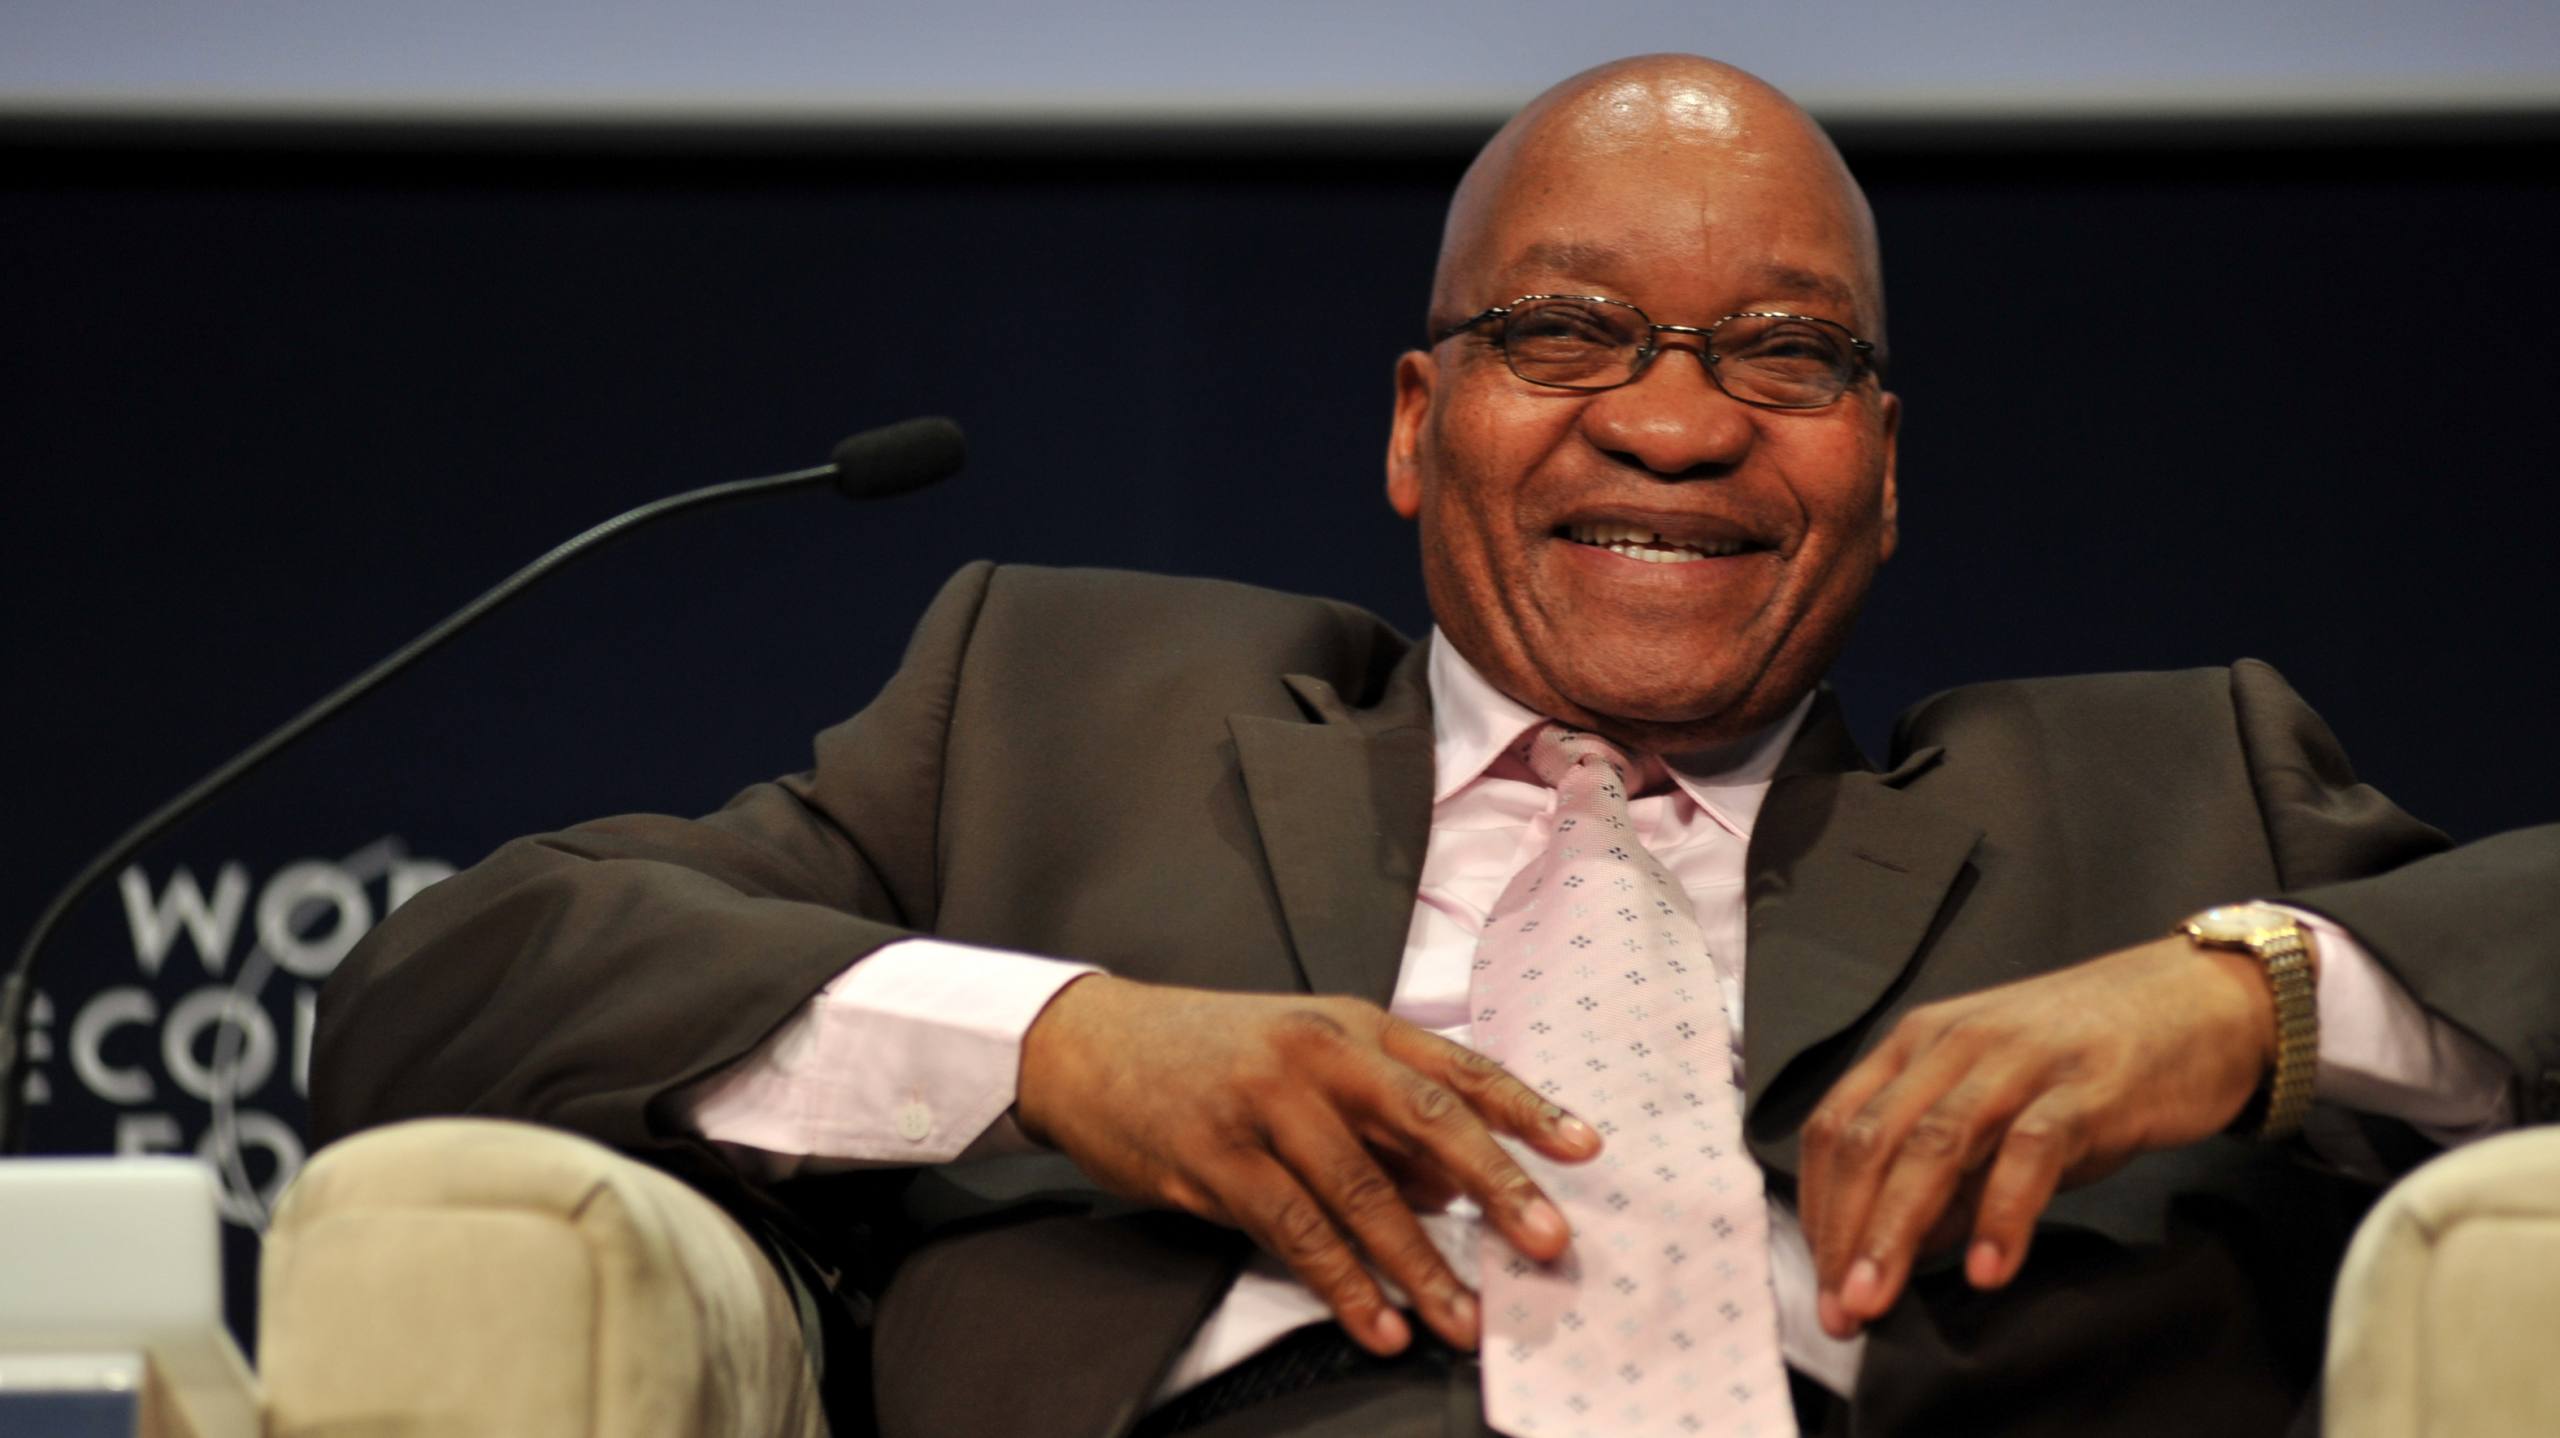 CAPE TOWN/SOUTH AFRICA, 12JUN2009 -  Jacob Zuma, Presdent of South Africa, at the Closing Plenary : Africa's Roadmap: From Crisis to Opportunity held during the World Economic Forum on Africa 2009 in Cape Town, South Africa, June 12, 2009

Copyright World Economic Forum www.weforum.org / Eric Miller emiller@iafrica.com